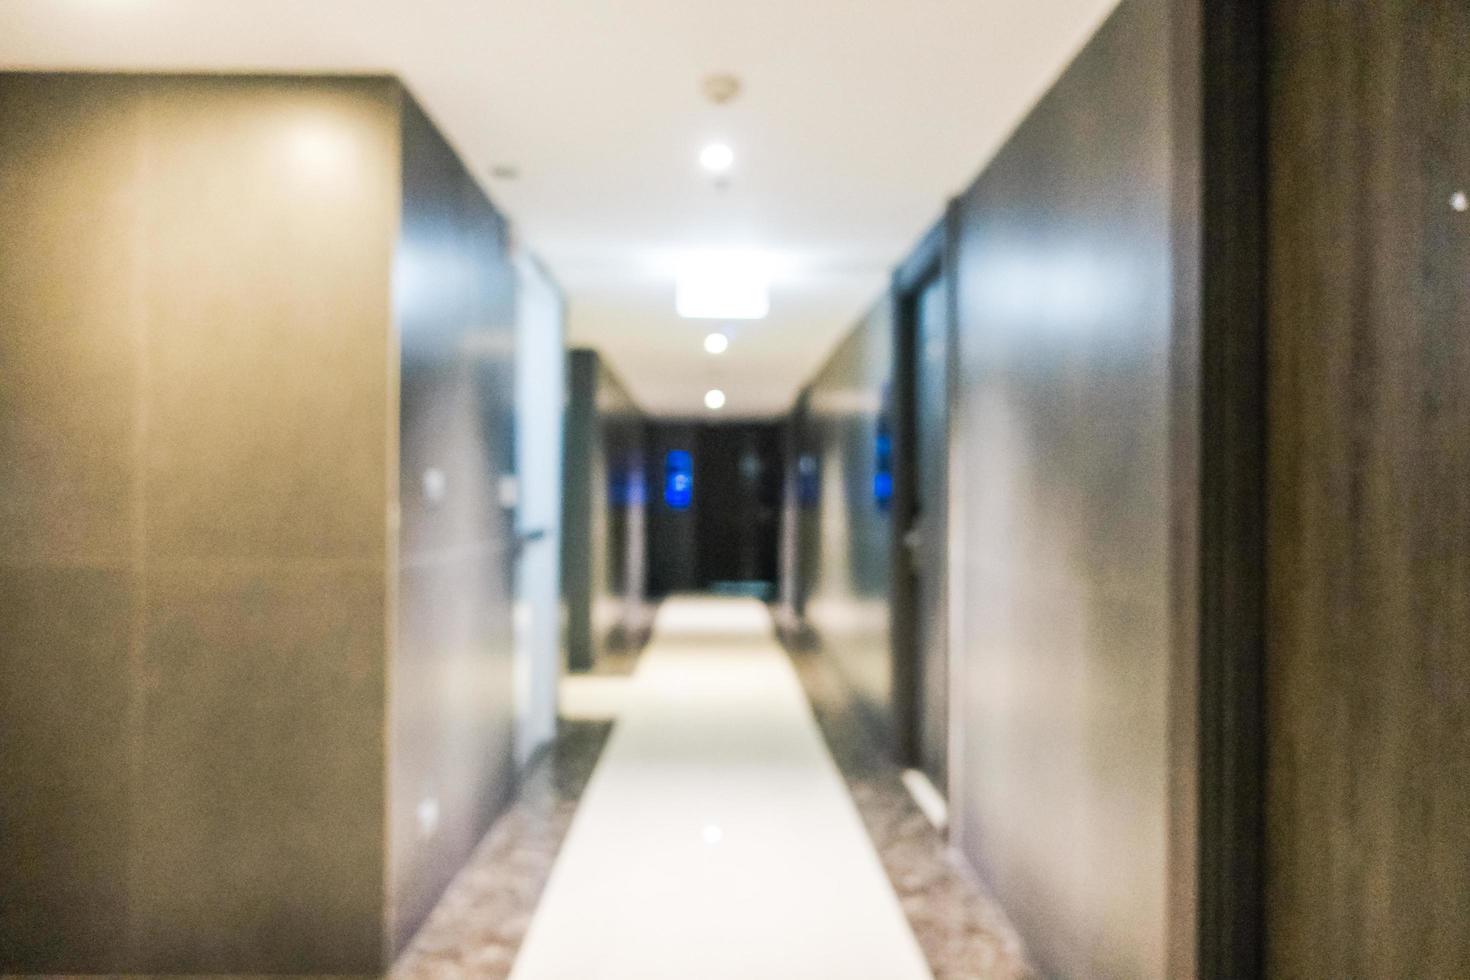 Abstract blur defocused hotel and lobby interior photo